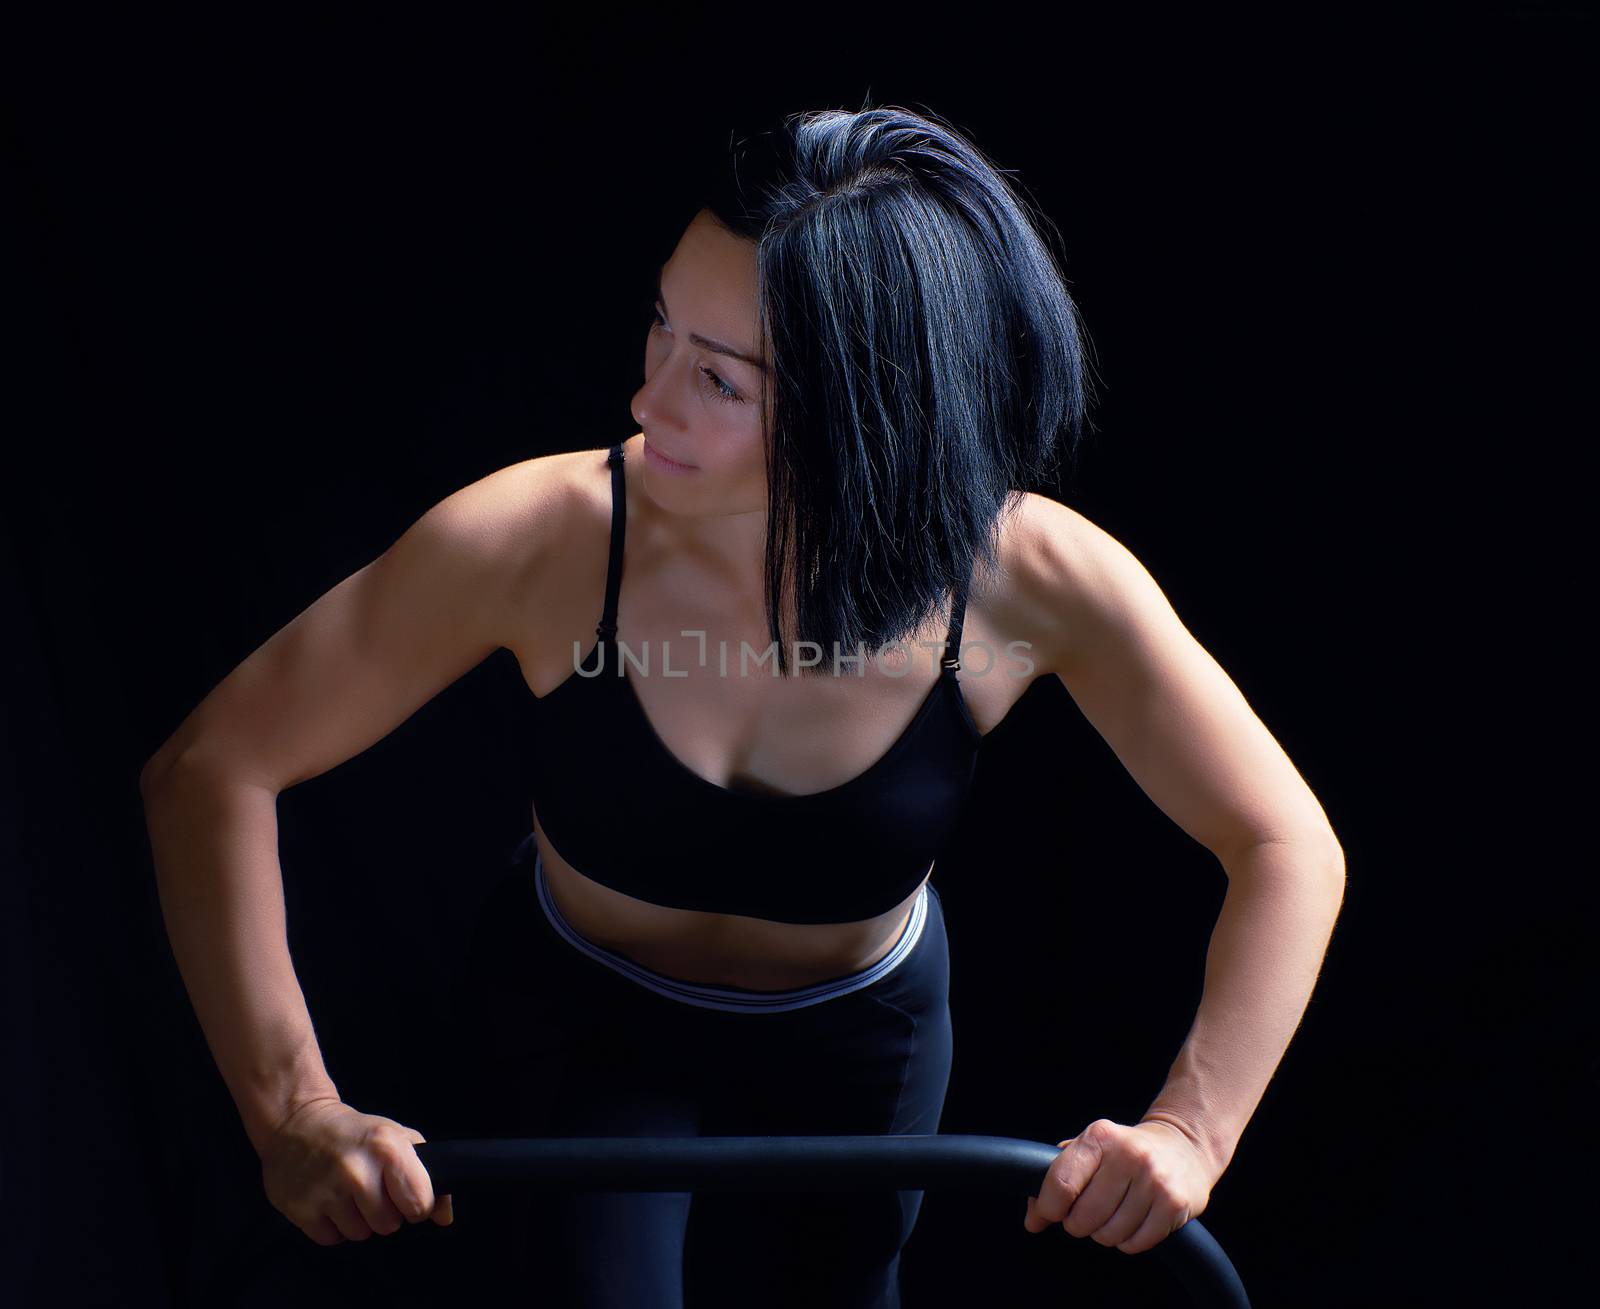 young beautiful athletic girl with muscles in a black bra is wrung out in her arms, doing fitness and sports, studio photo in a dark key